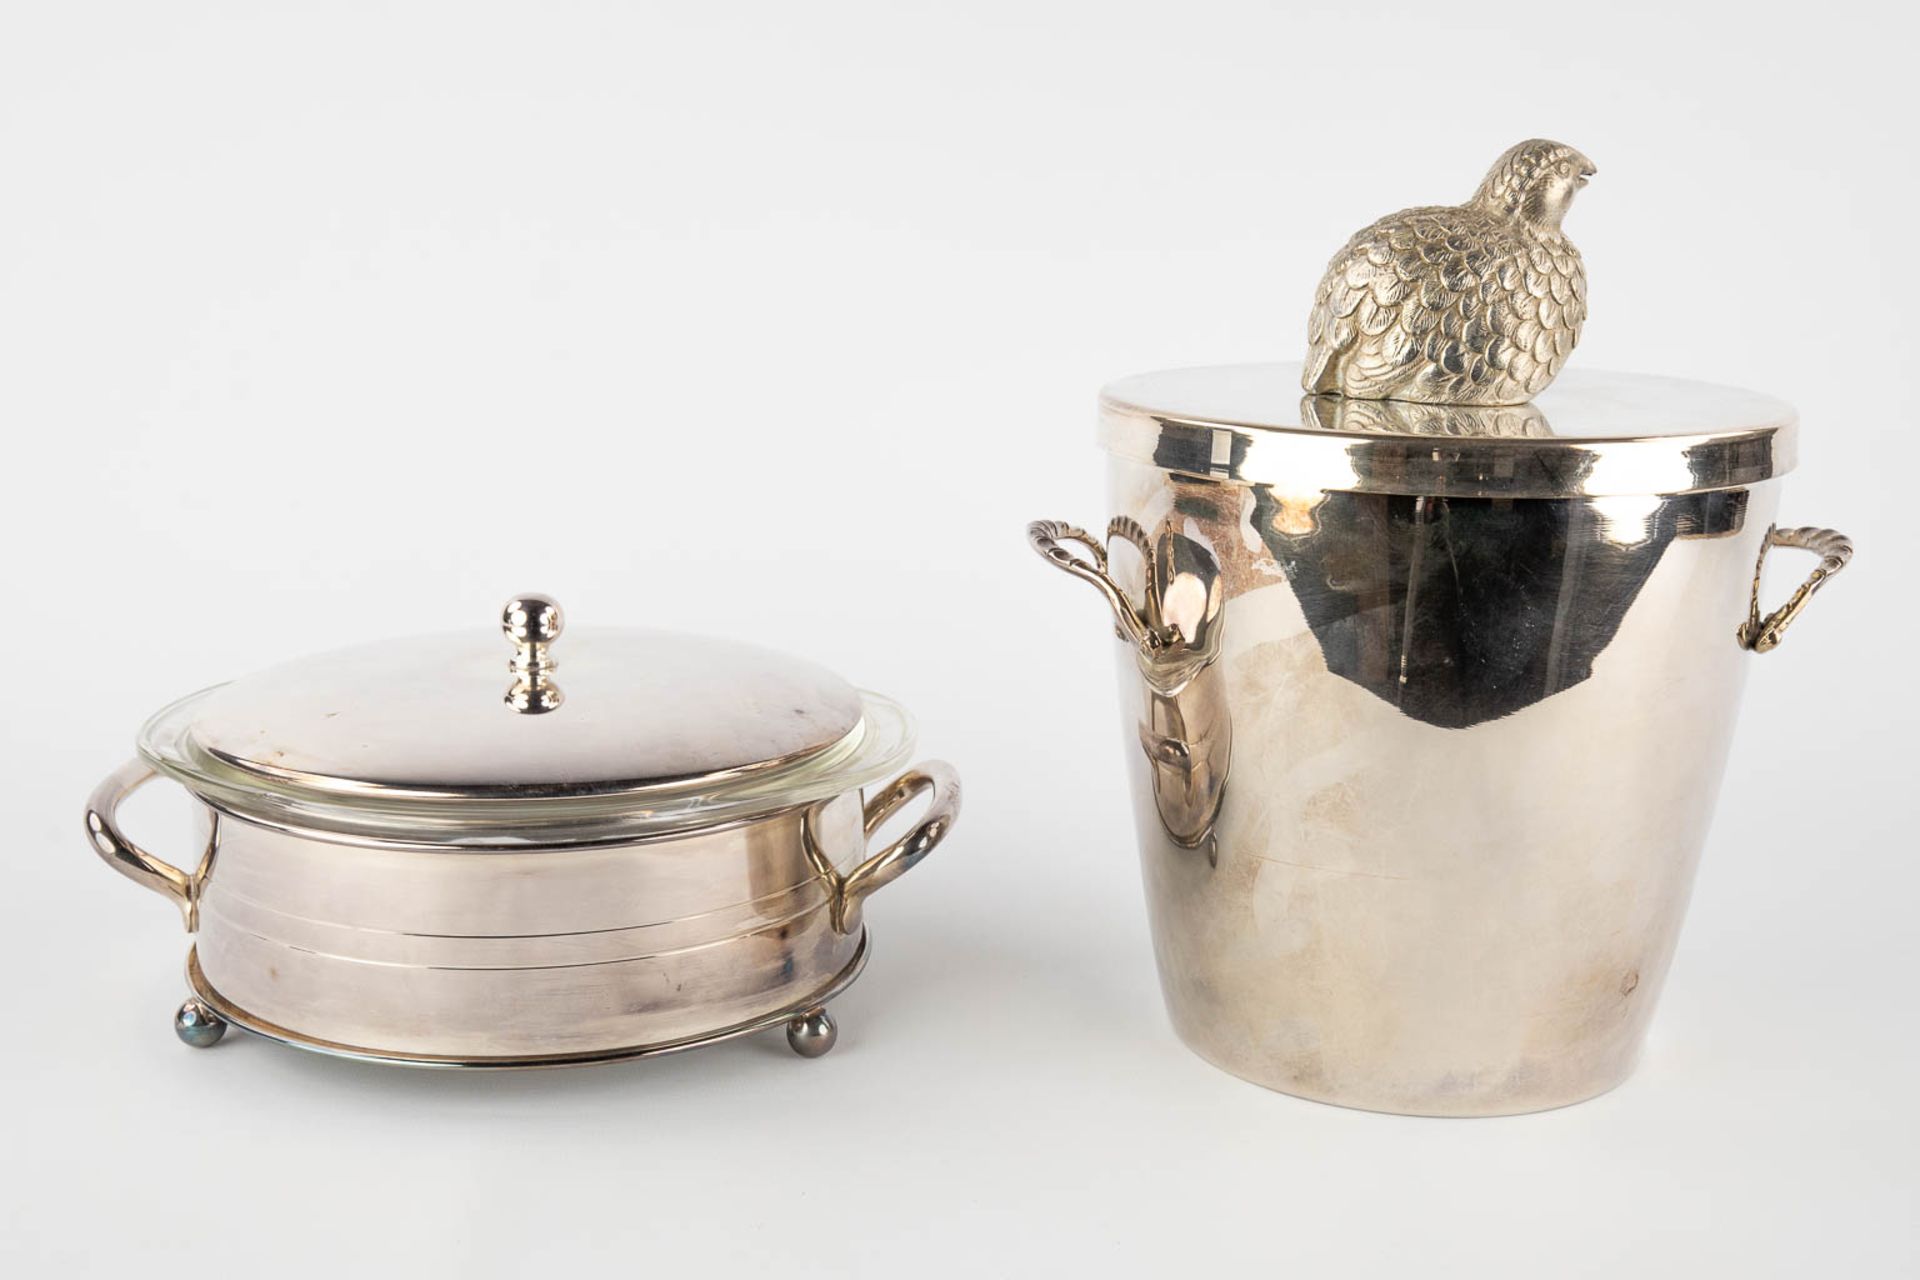 Four silver-plated storage boxes, ice-pails. (H:27 x D:20 cm) - Image 3 of 20